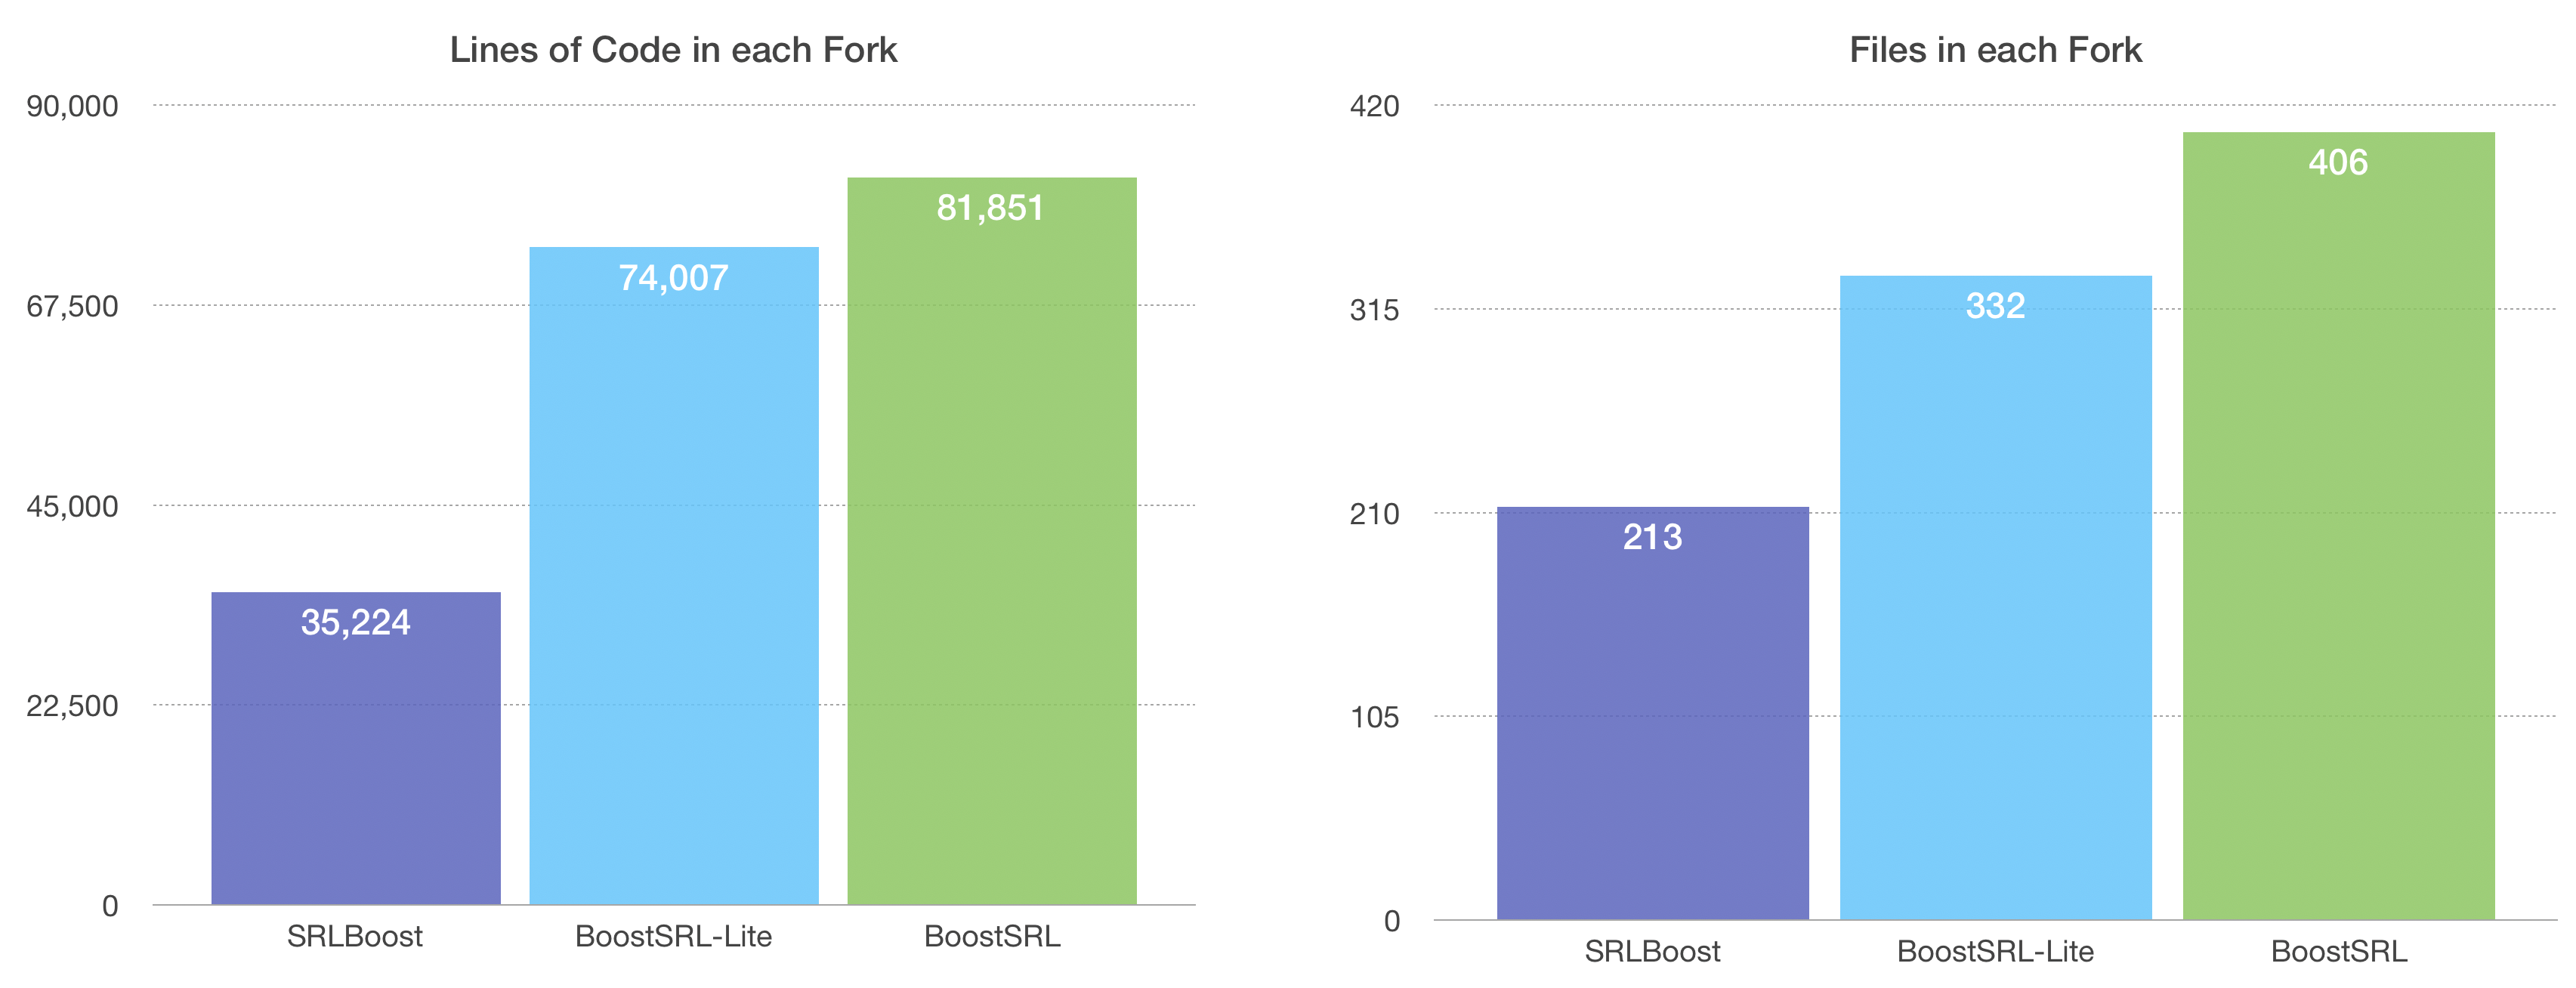 Graph comparing the number of lines of code in each fork: BoostSRL, BoostSRL-Lite, and SRLBoost. SRLBoost is about half the size of BoostSRL.